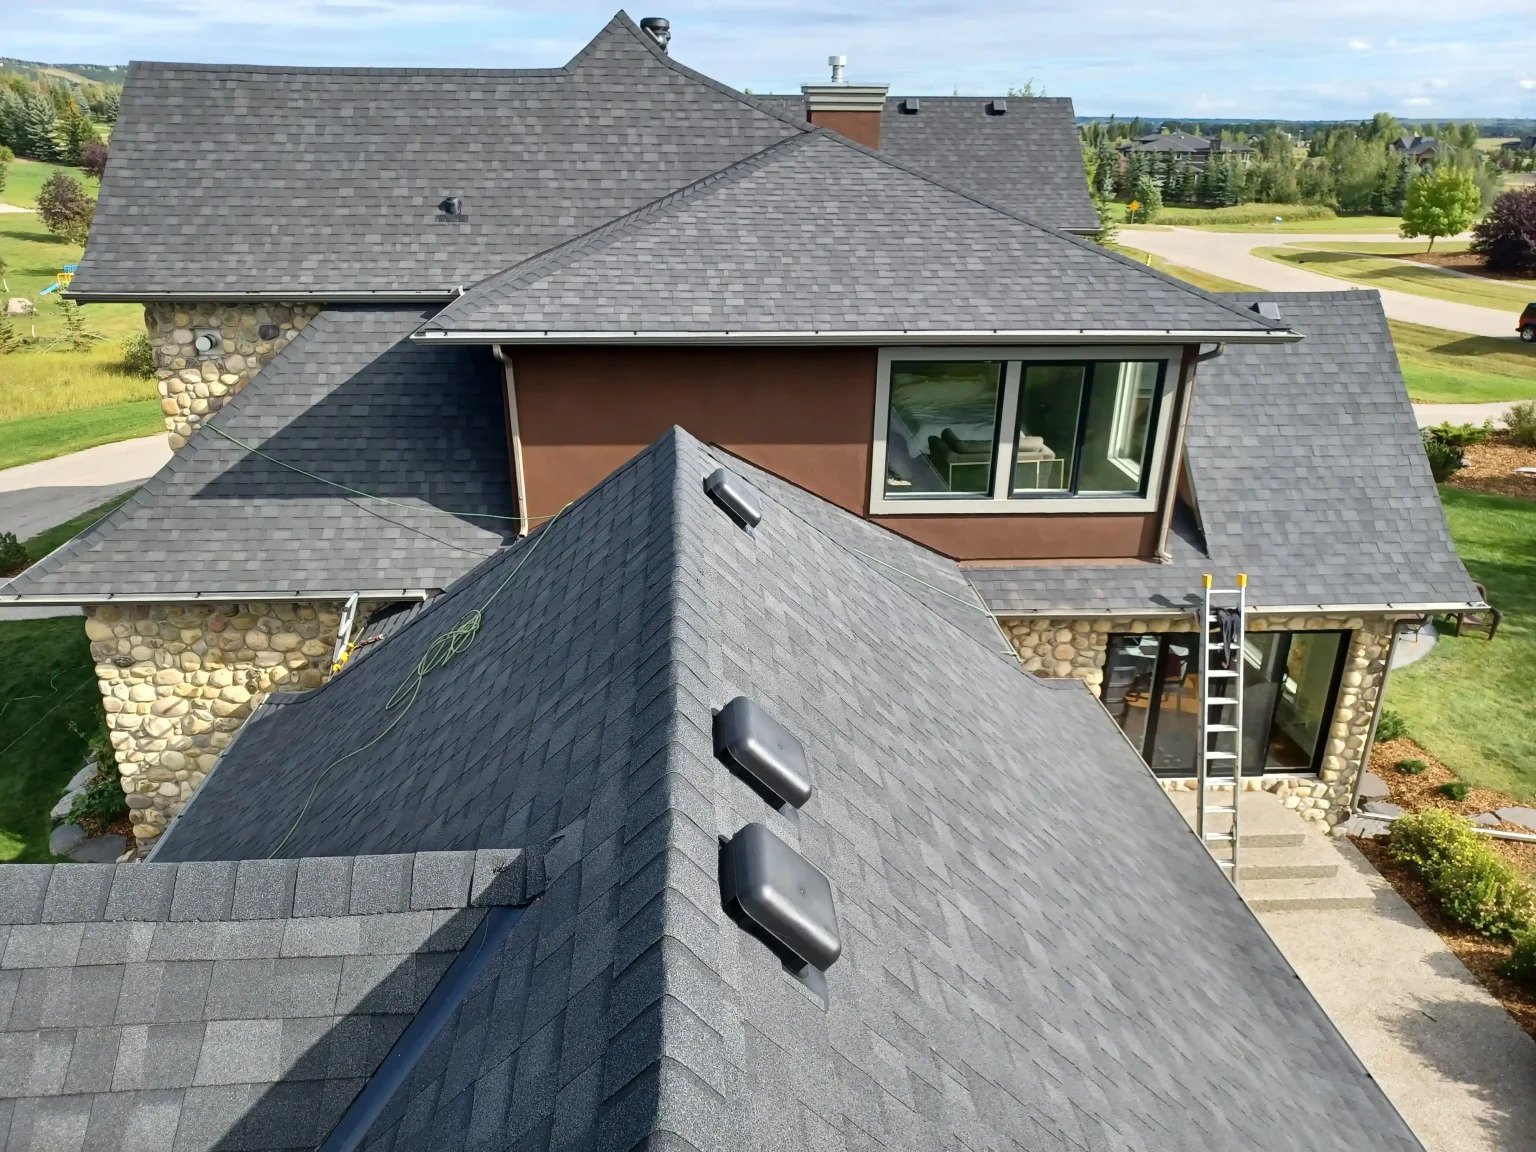 Calgary’s Elite Roofing Company, DiamondCut Roofing Offers Top-of-the-line Services